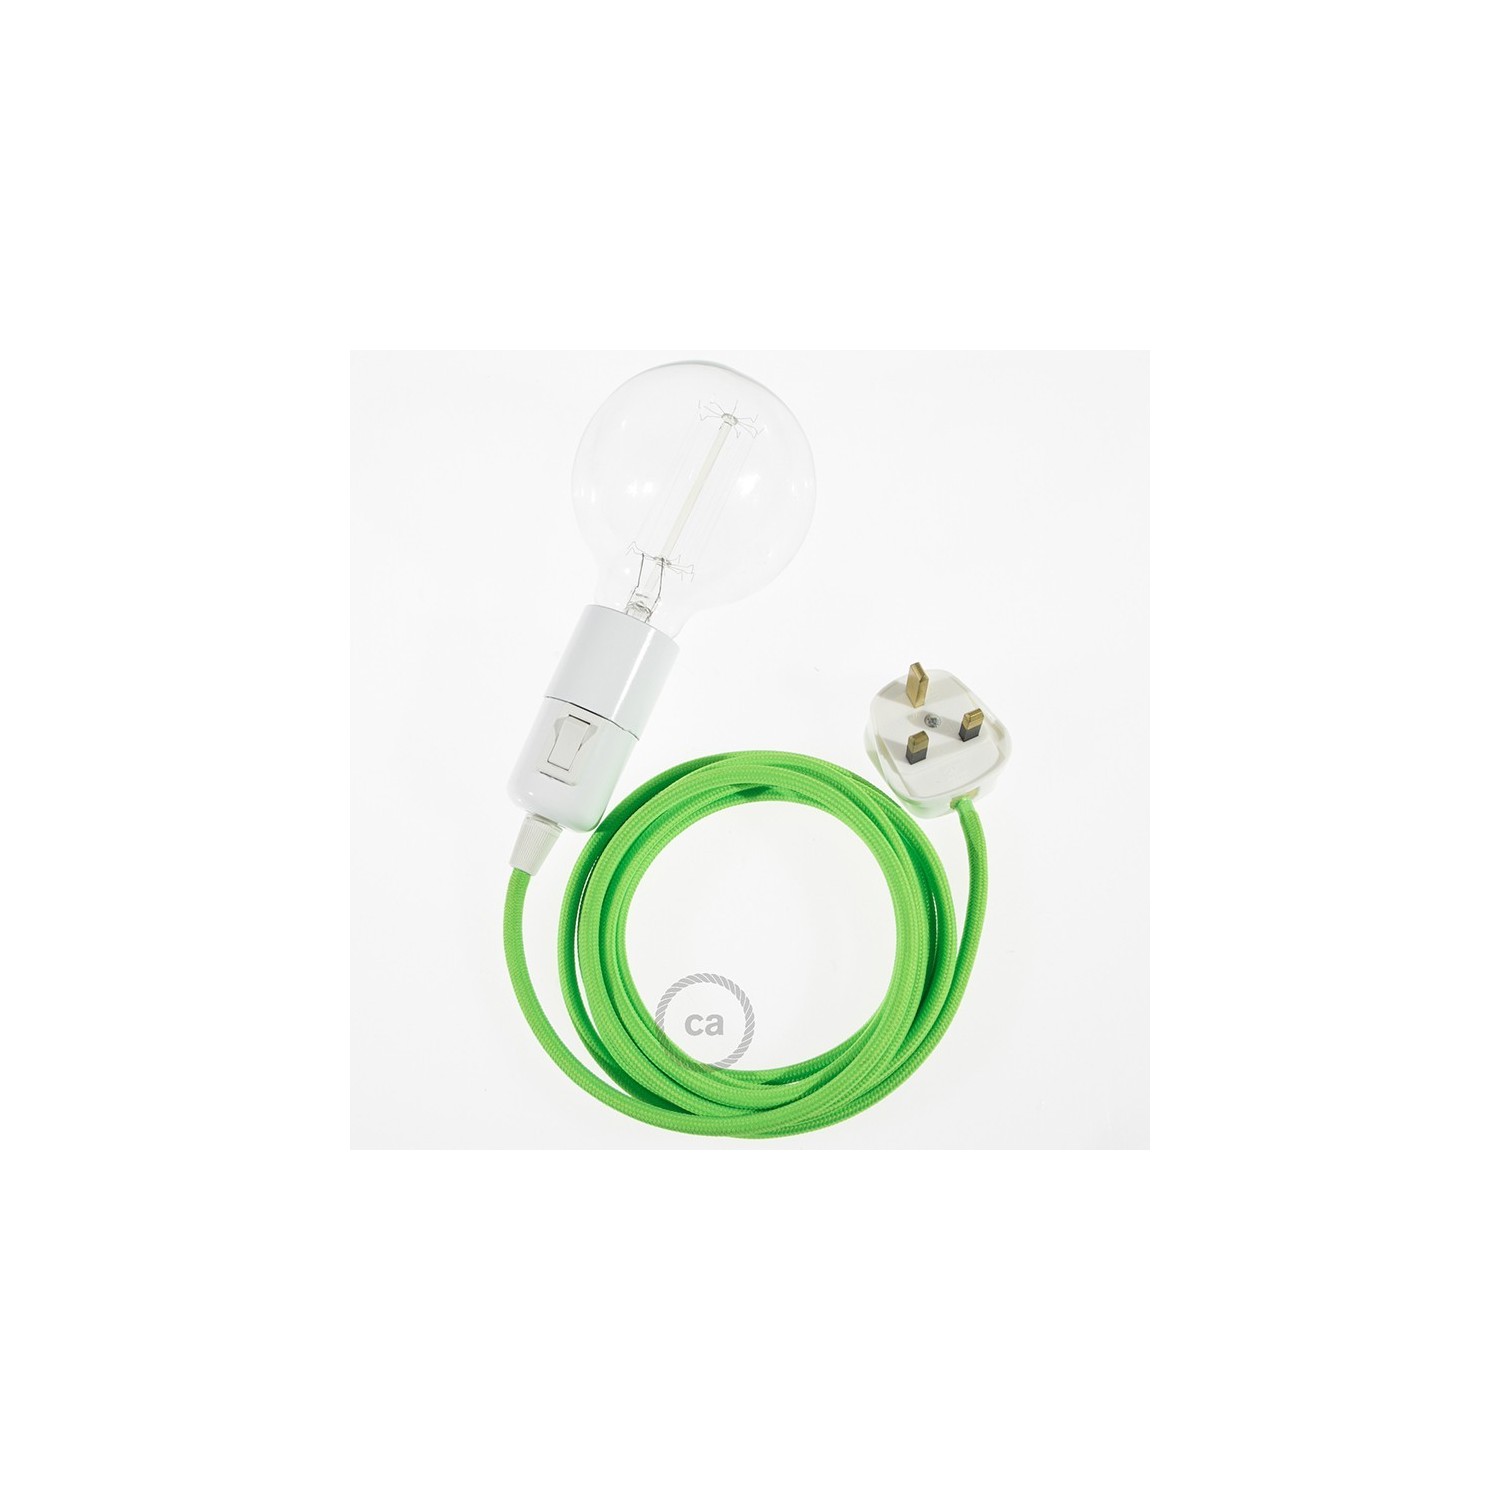 Create your RF06 Green Fluo Snake and bring the light wherever you want.